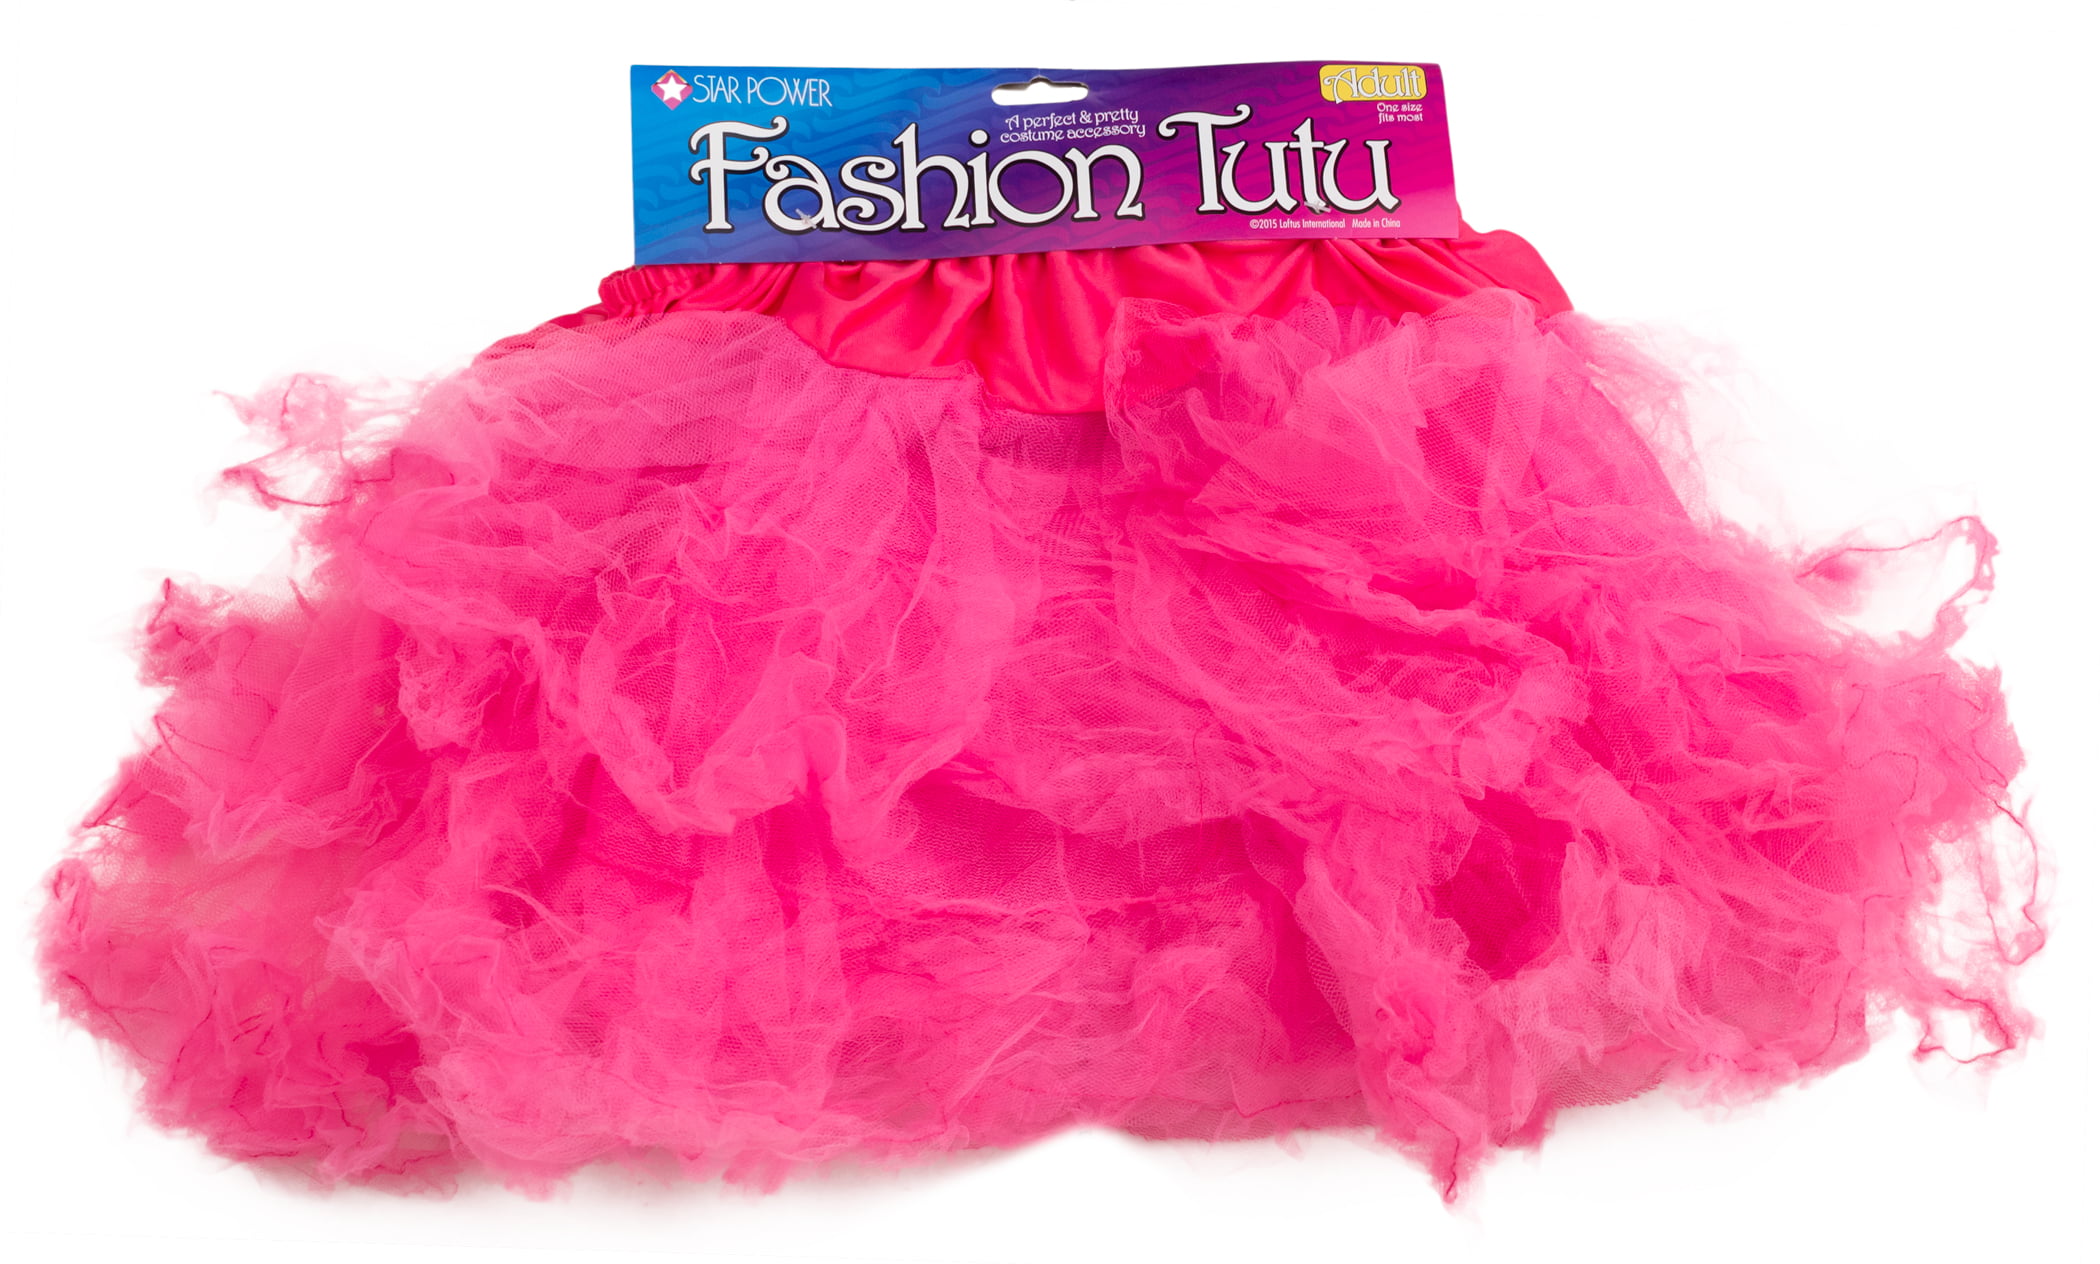 Halloween Costume Accessories Adult Nylon Material Hot Pink Colored Organza Tutu